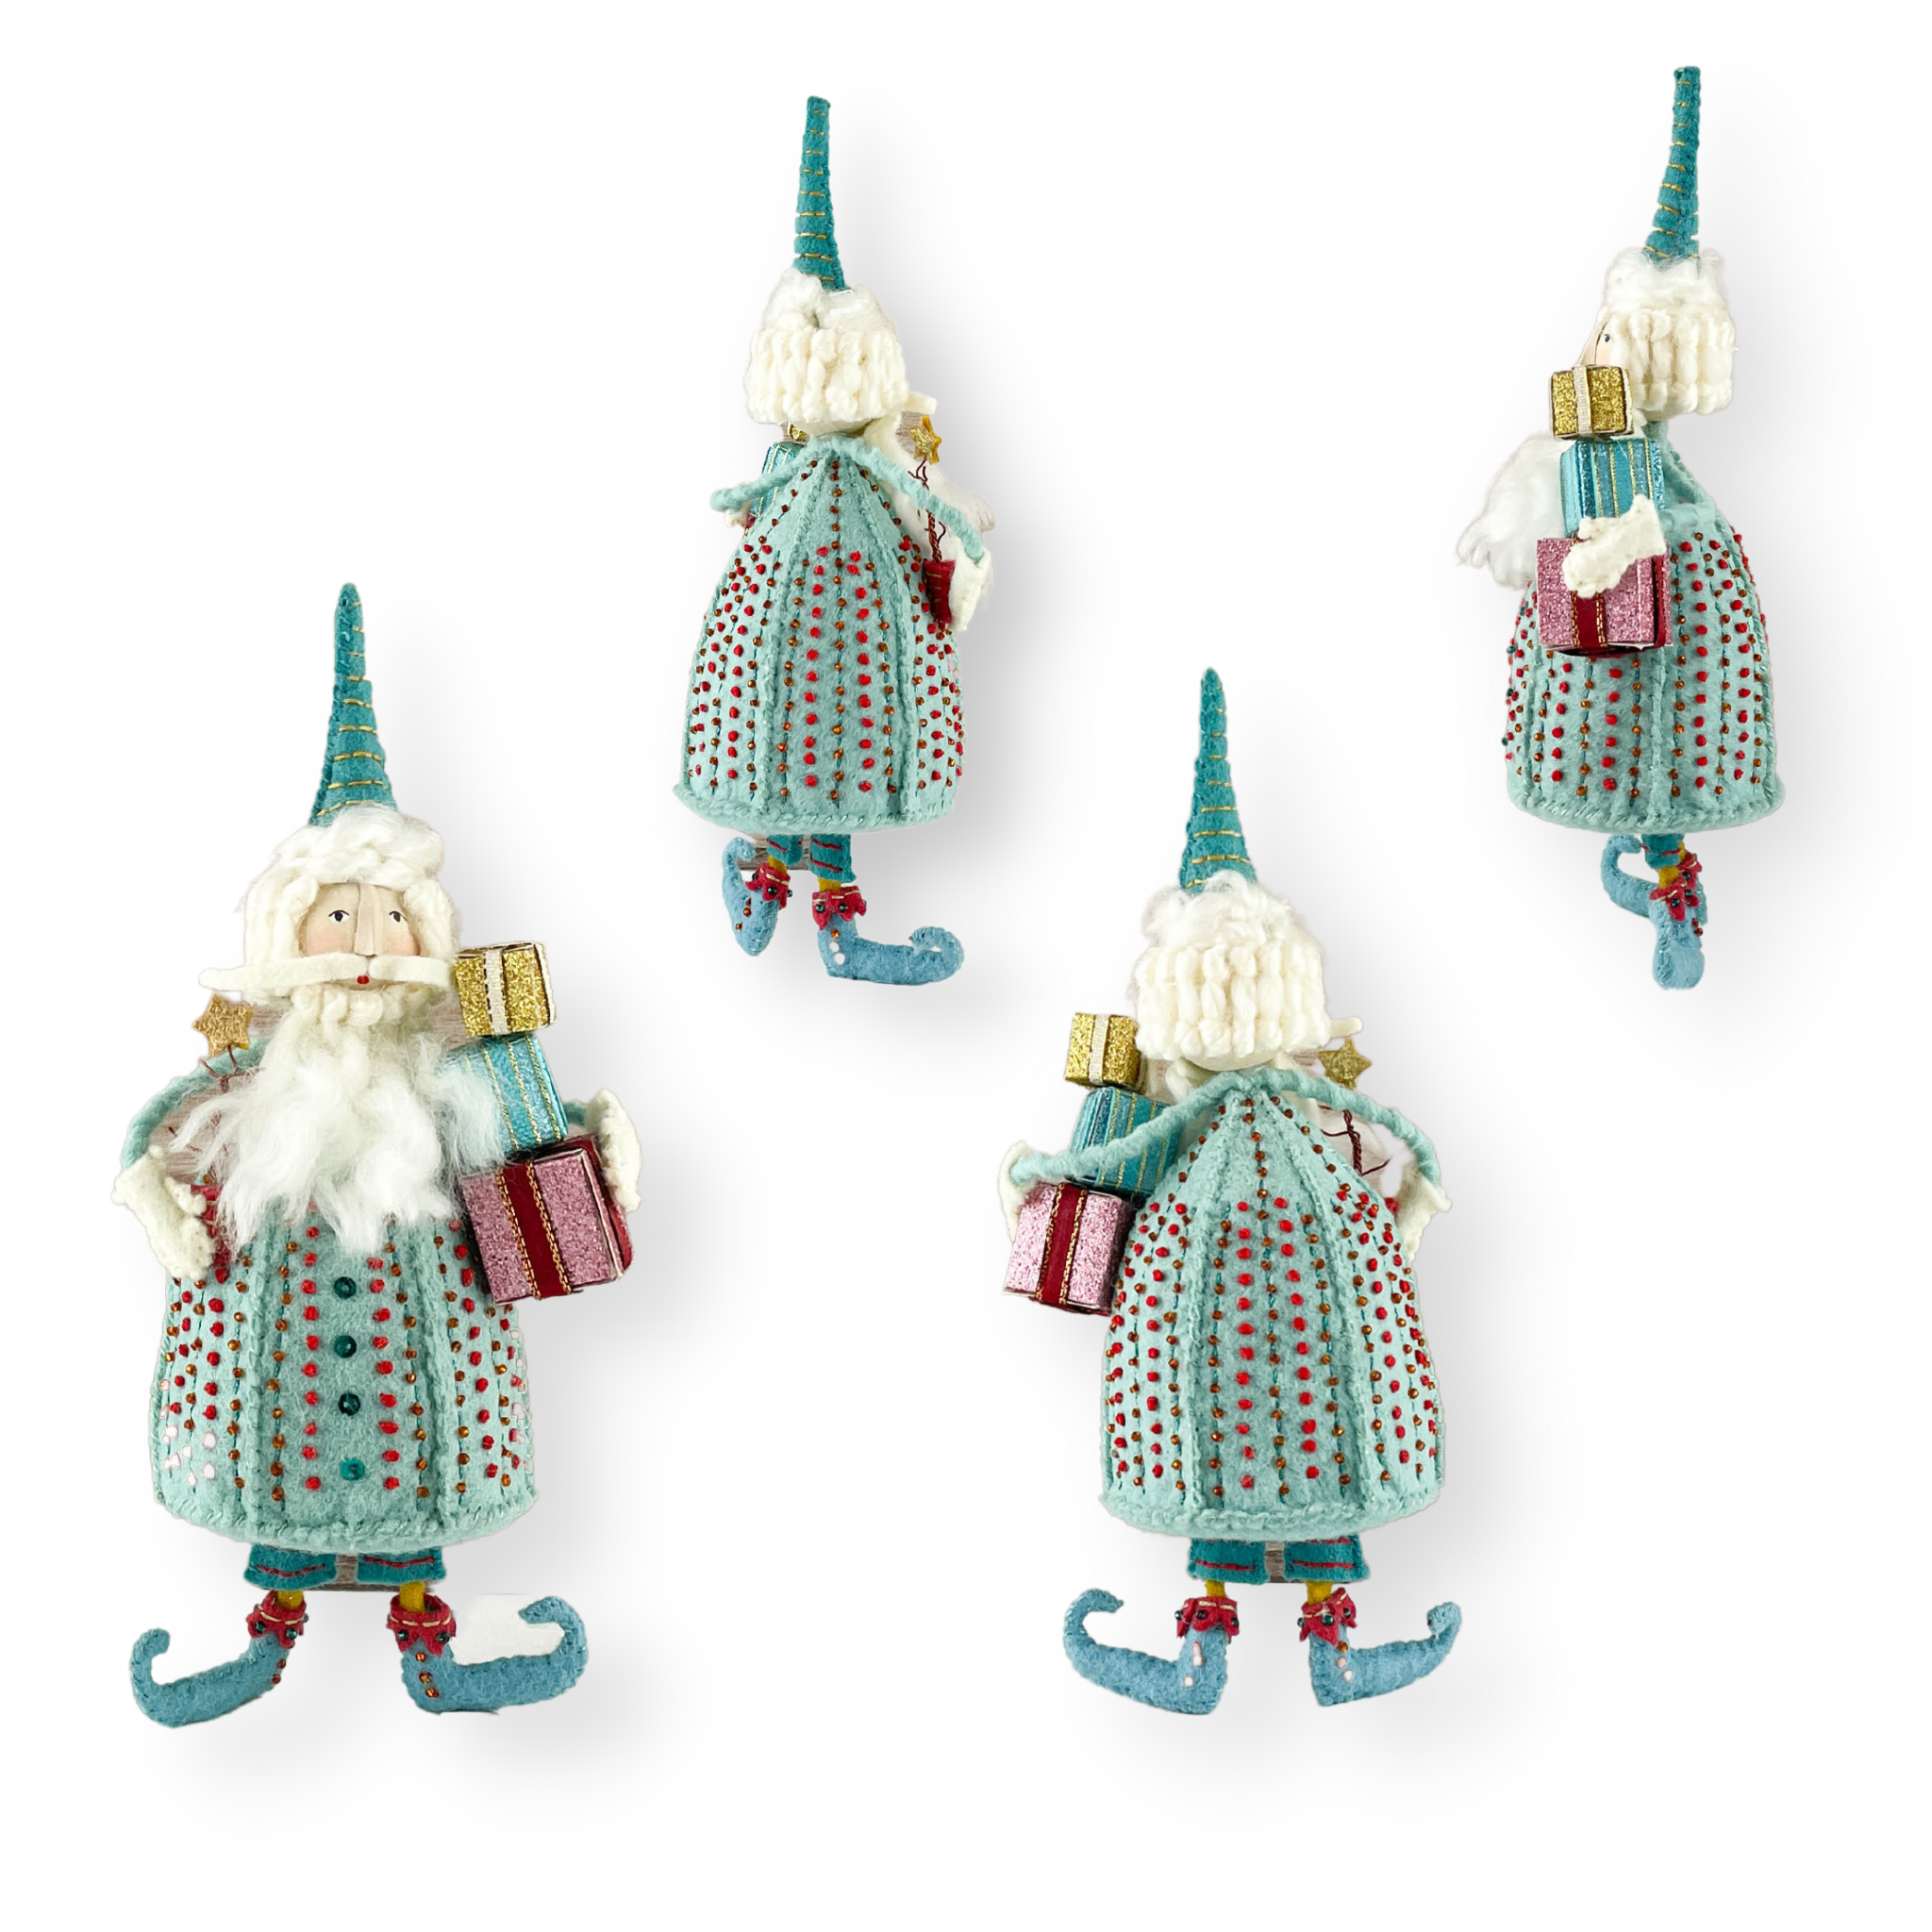 Whimsical Santa E-Pattern and Instructions